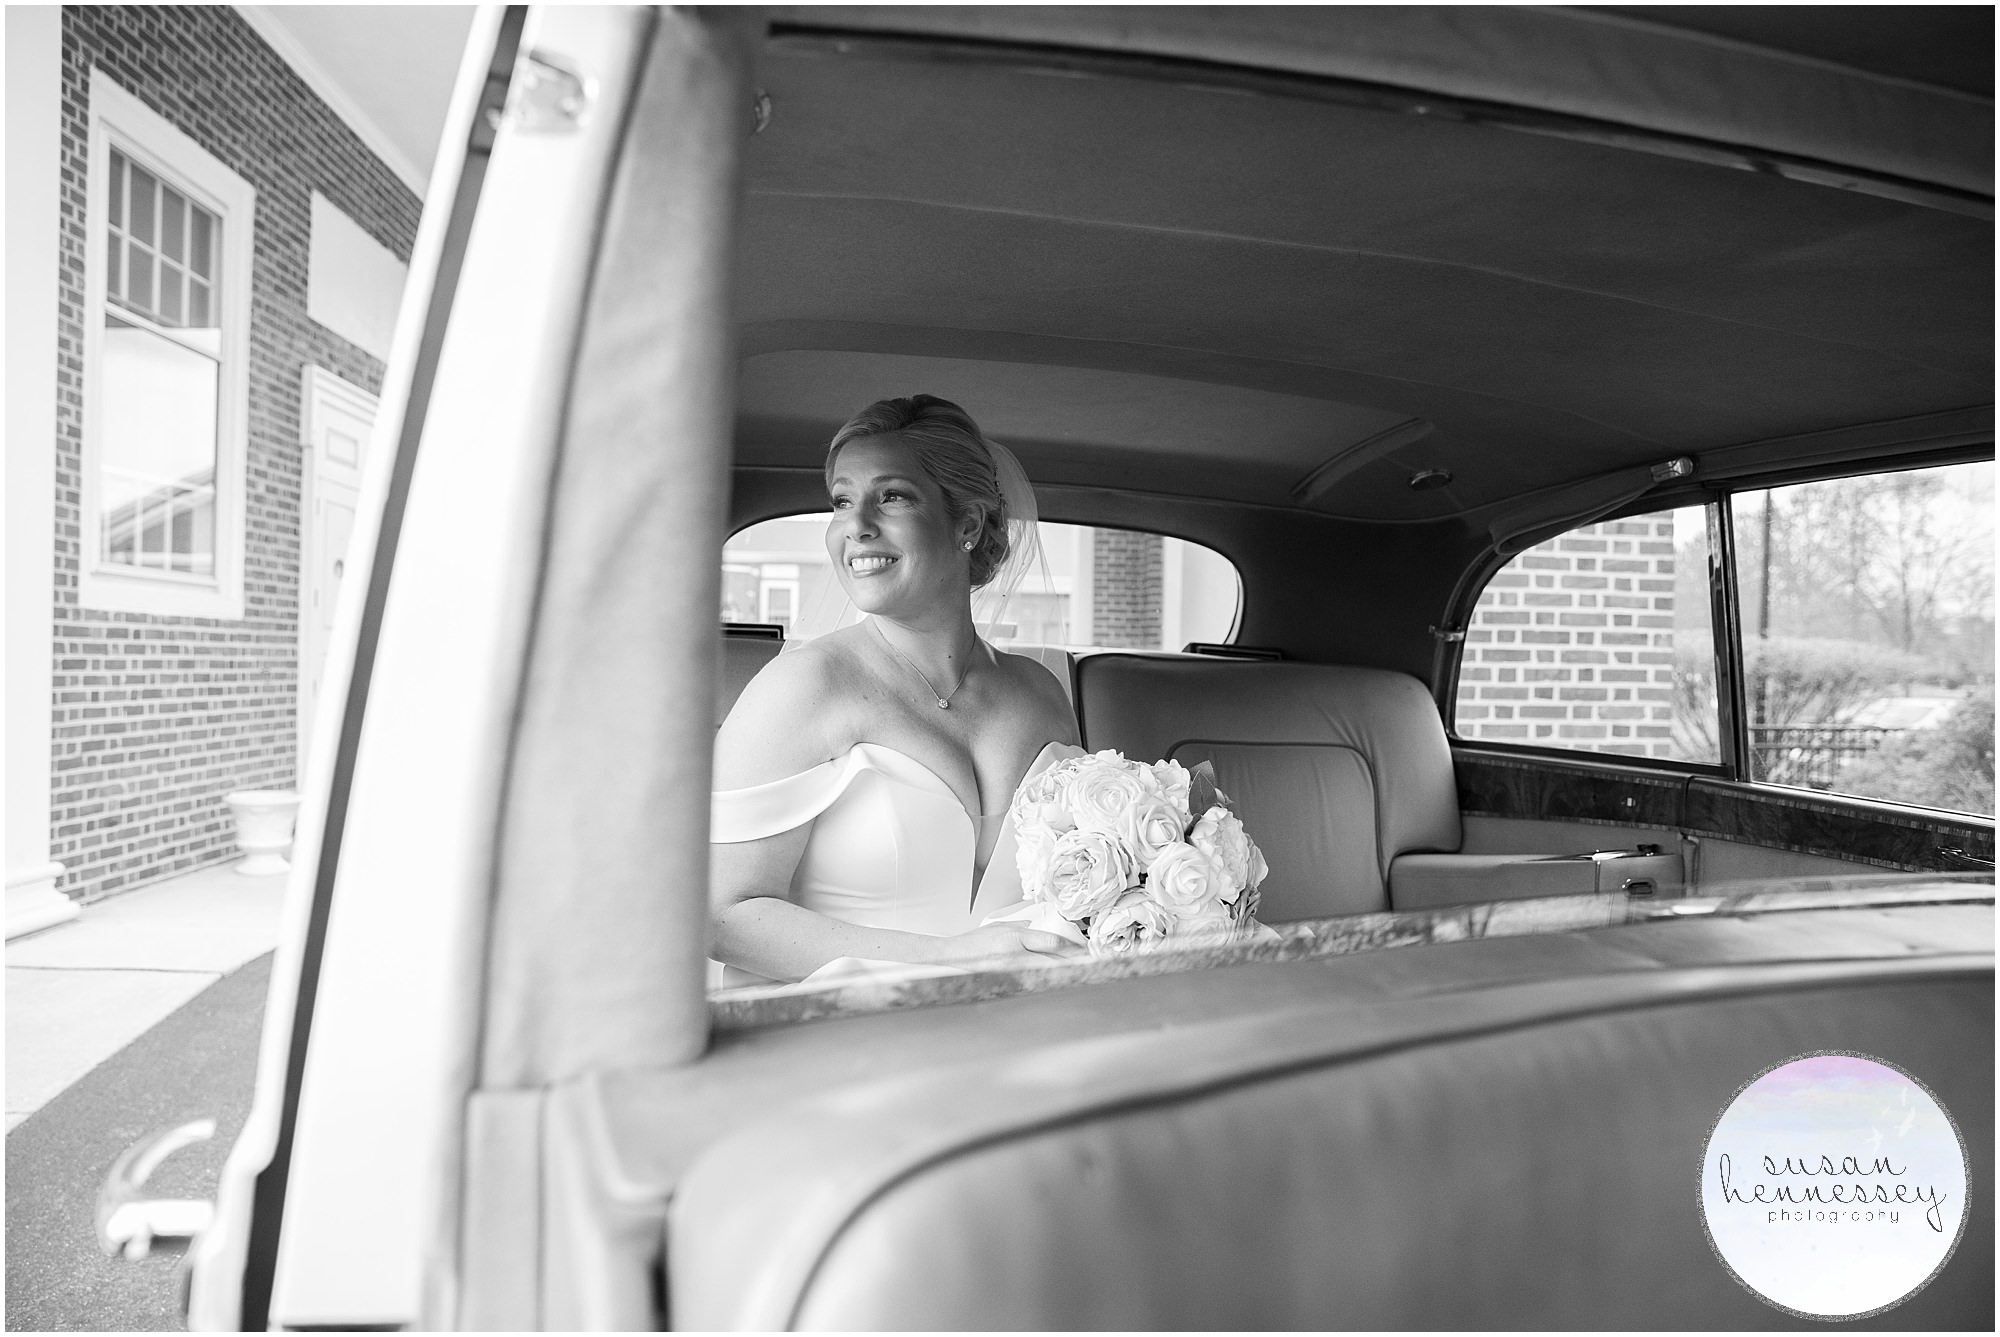 Planning a Micro Wedding? A vintage Rolls Royce is the perfect addition for photos.